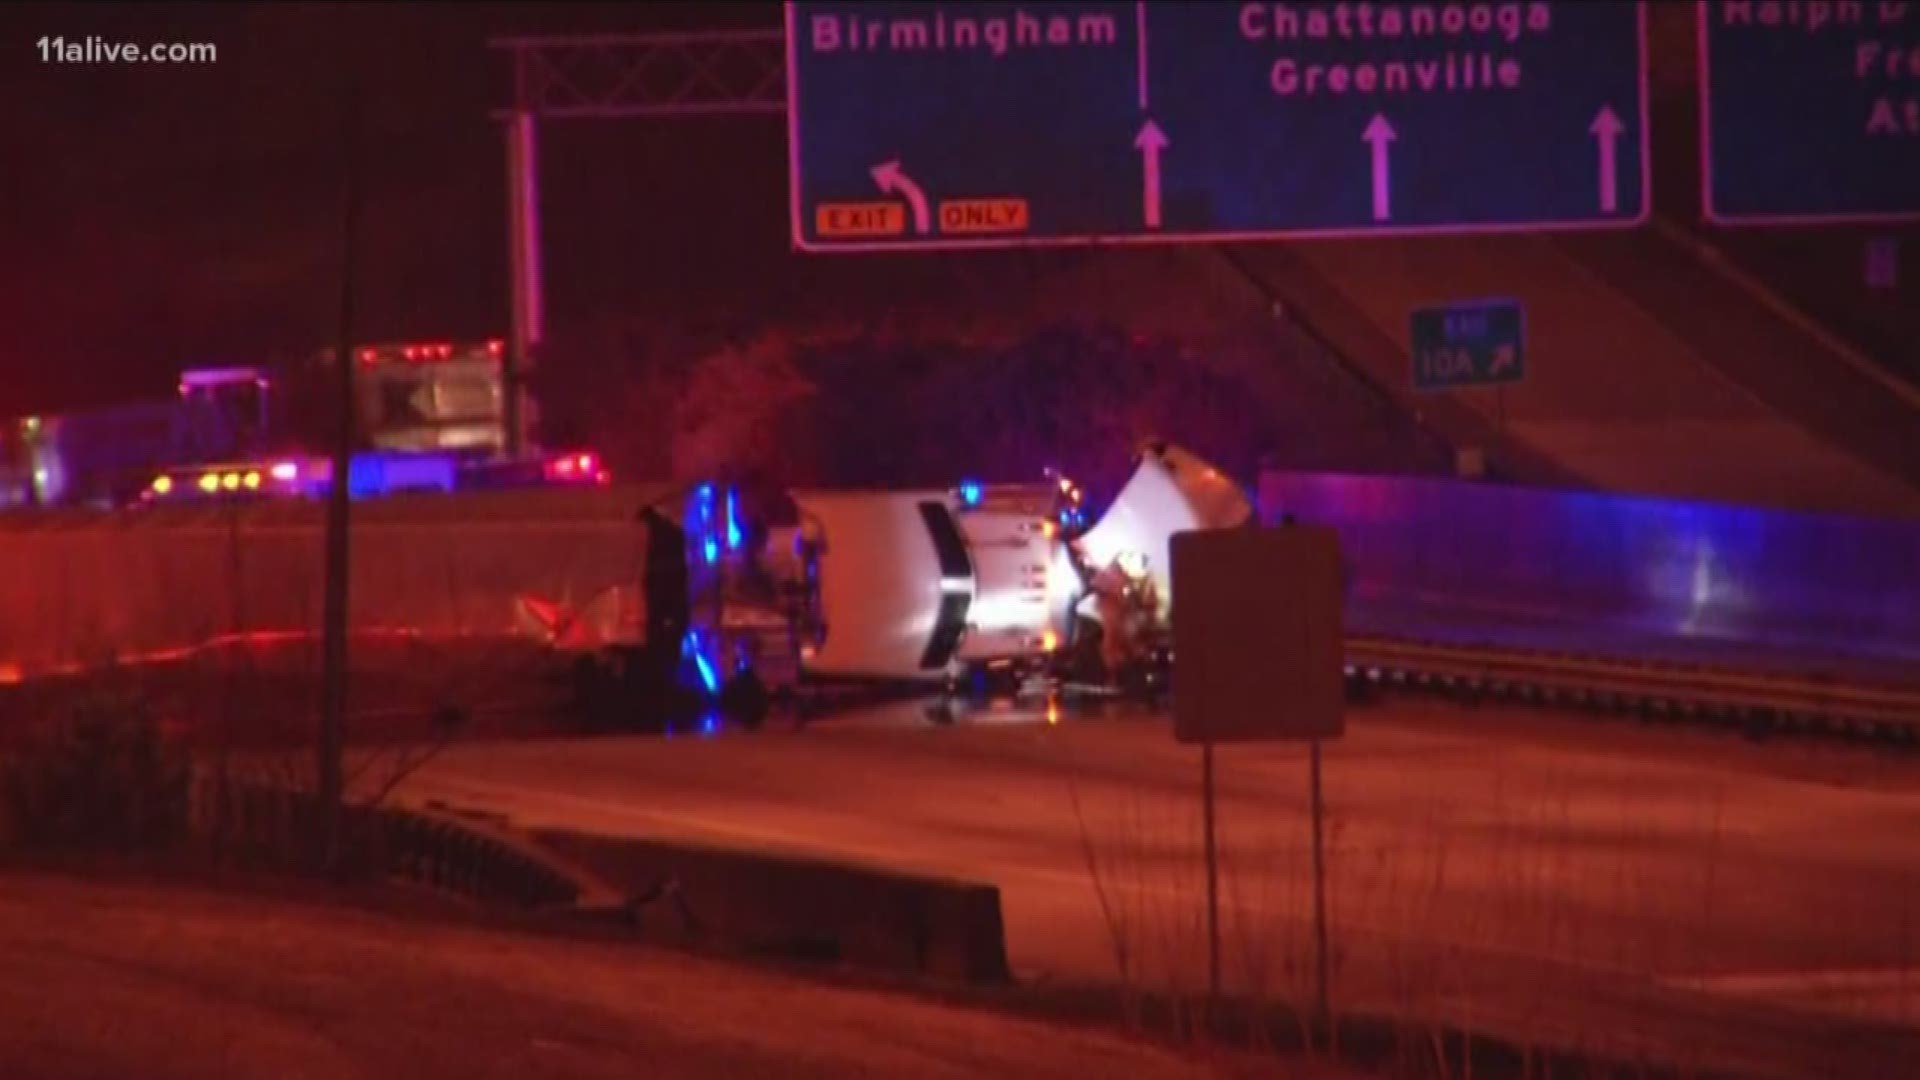 GDOT said the tractor trailer was carrying 41,000 pounds of ink.